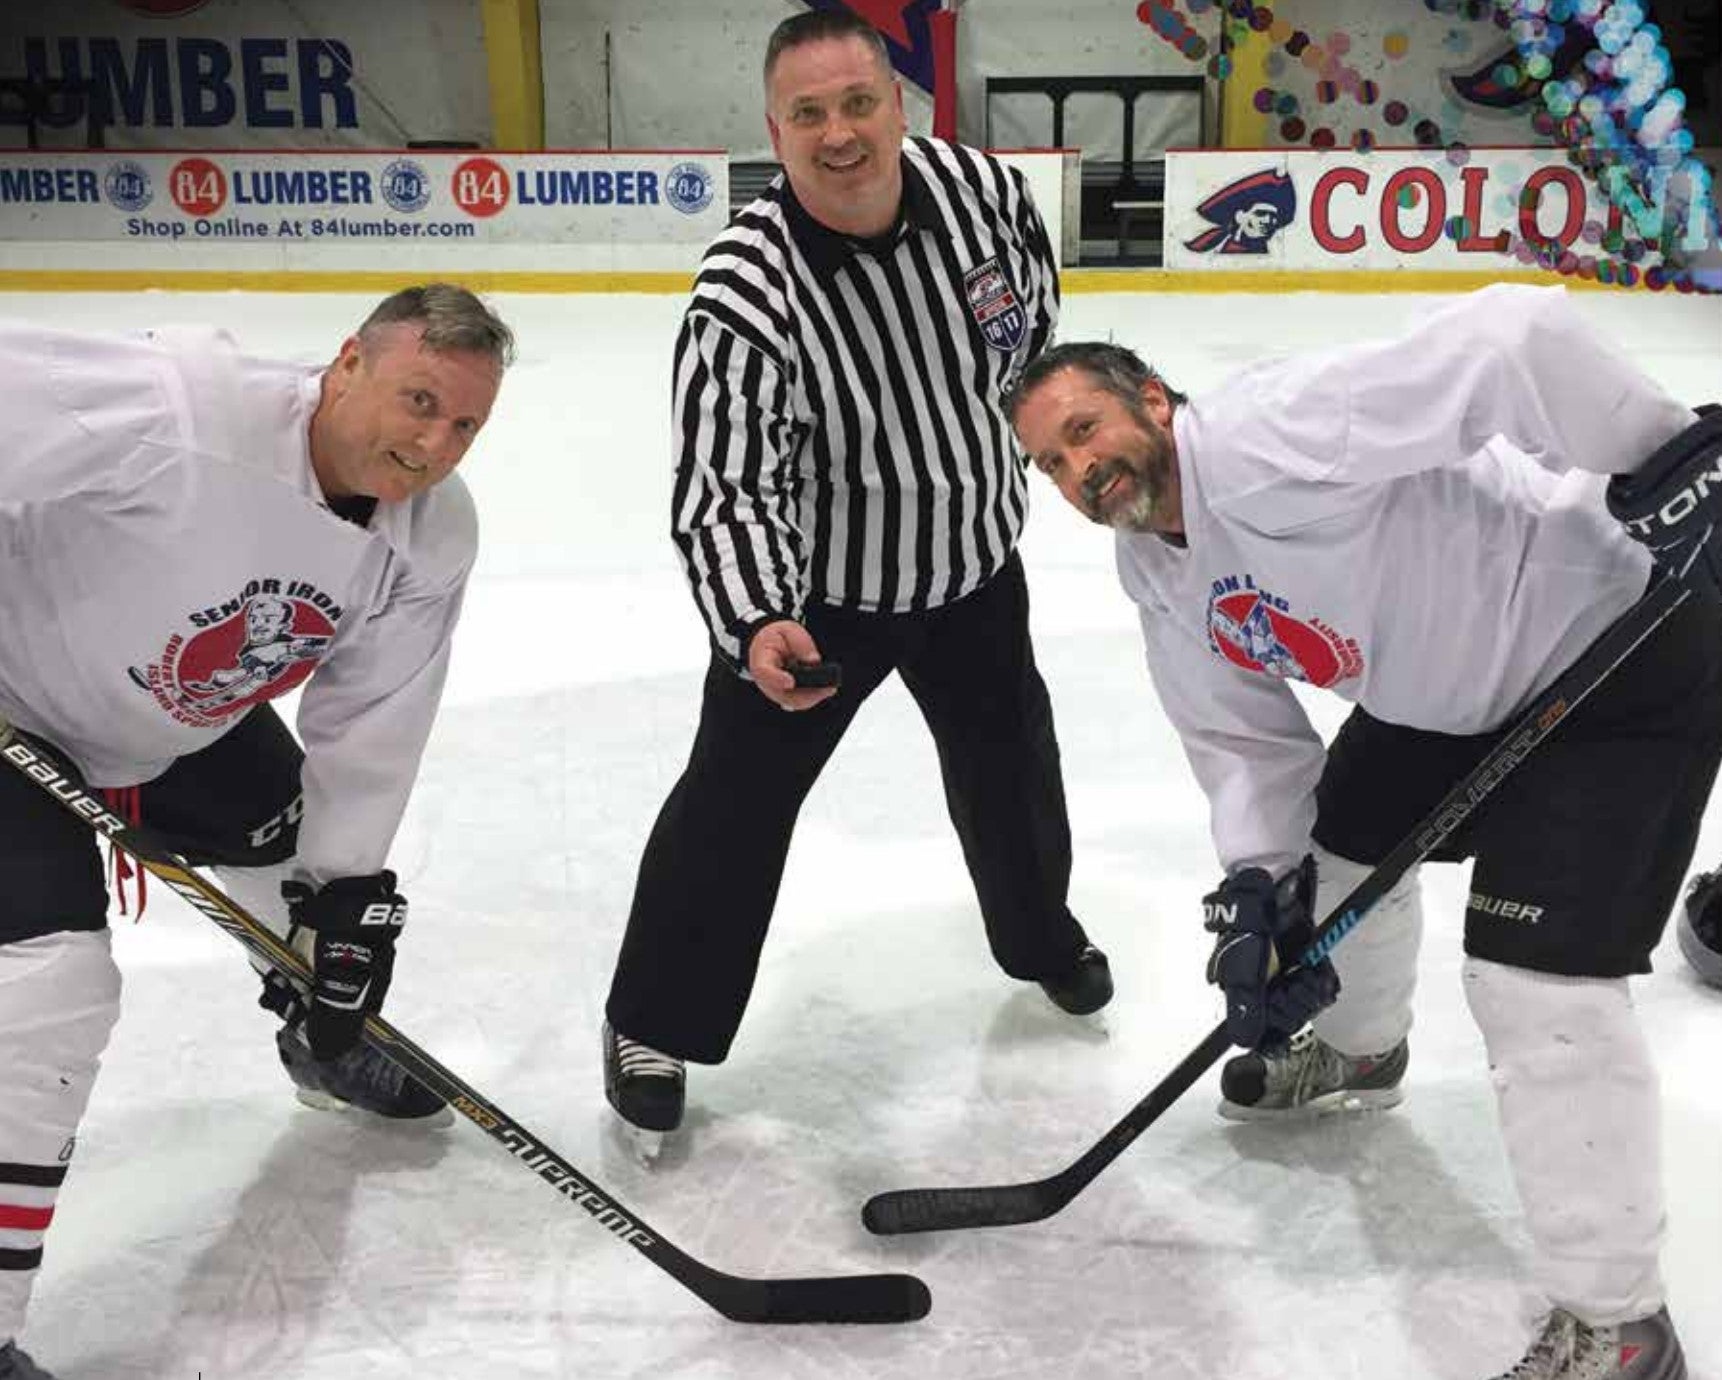 Pictured left to right: Fitzgerald, Department of Community Health Services and Rehabilitation Science Chair and Professor Tom Platt, and Bise on the ice having fun together